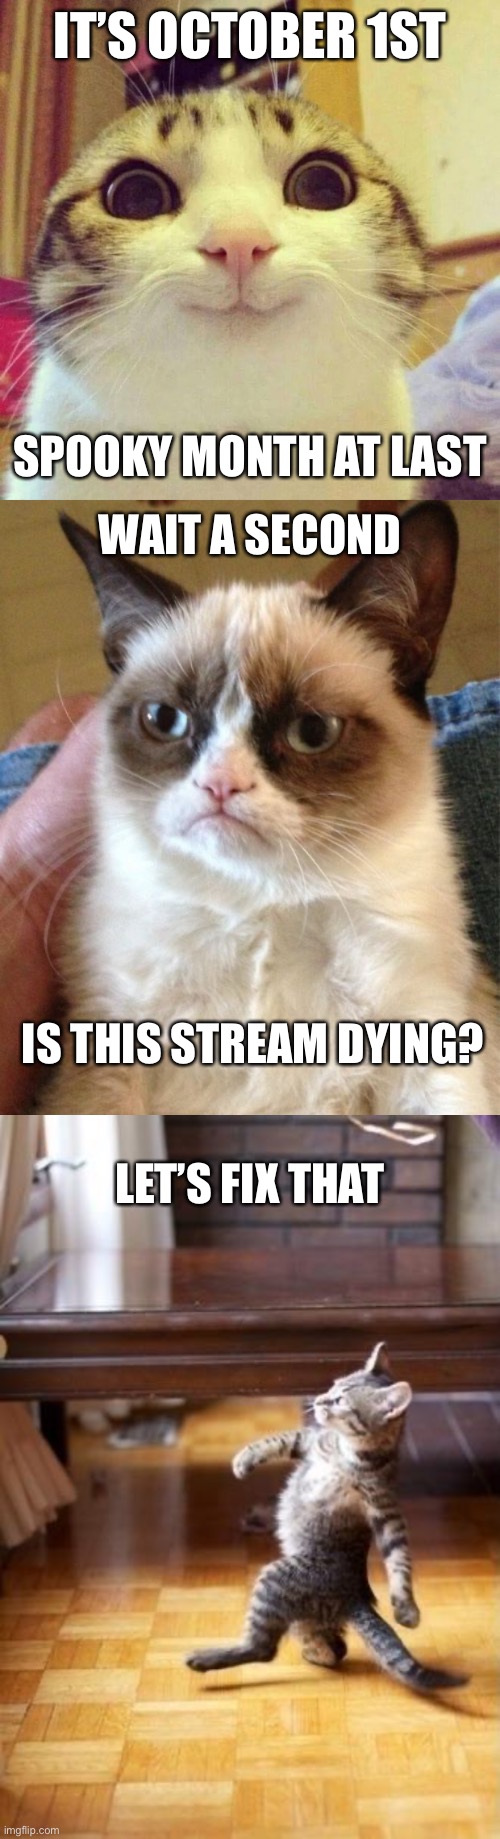 IT’S OCTOBER 1ST; SPOOKY MONTH AT LAST; WAIT A SECOND; IS THIS STREAM DYING? LET’S FIX THAT | image tagged in memes,smiling cat,grumpy cat,cool cat stroll | made w/ Imgflip meme maker